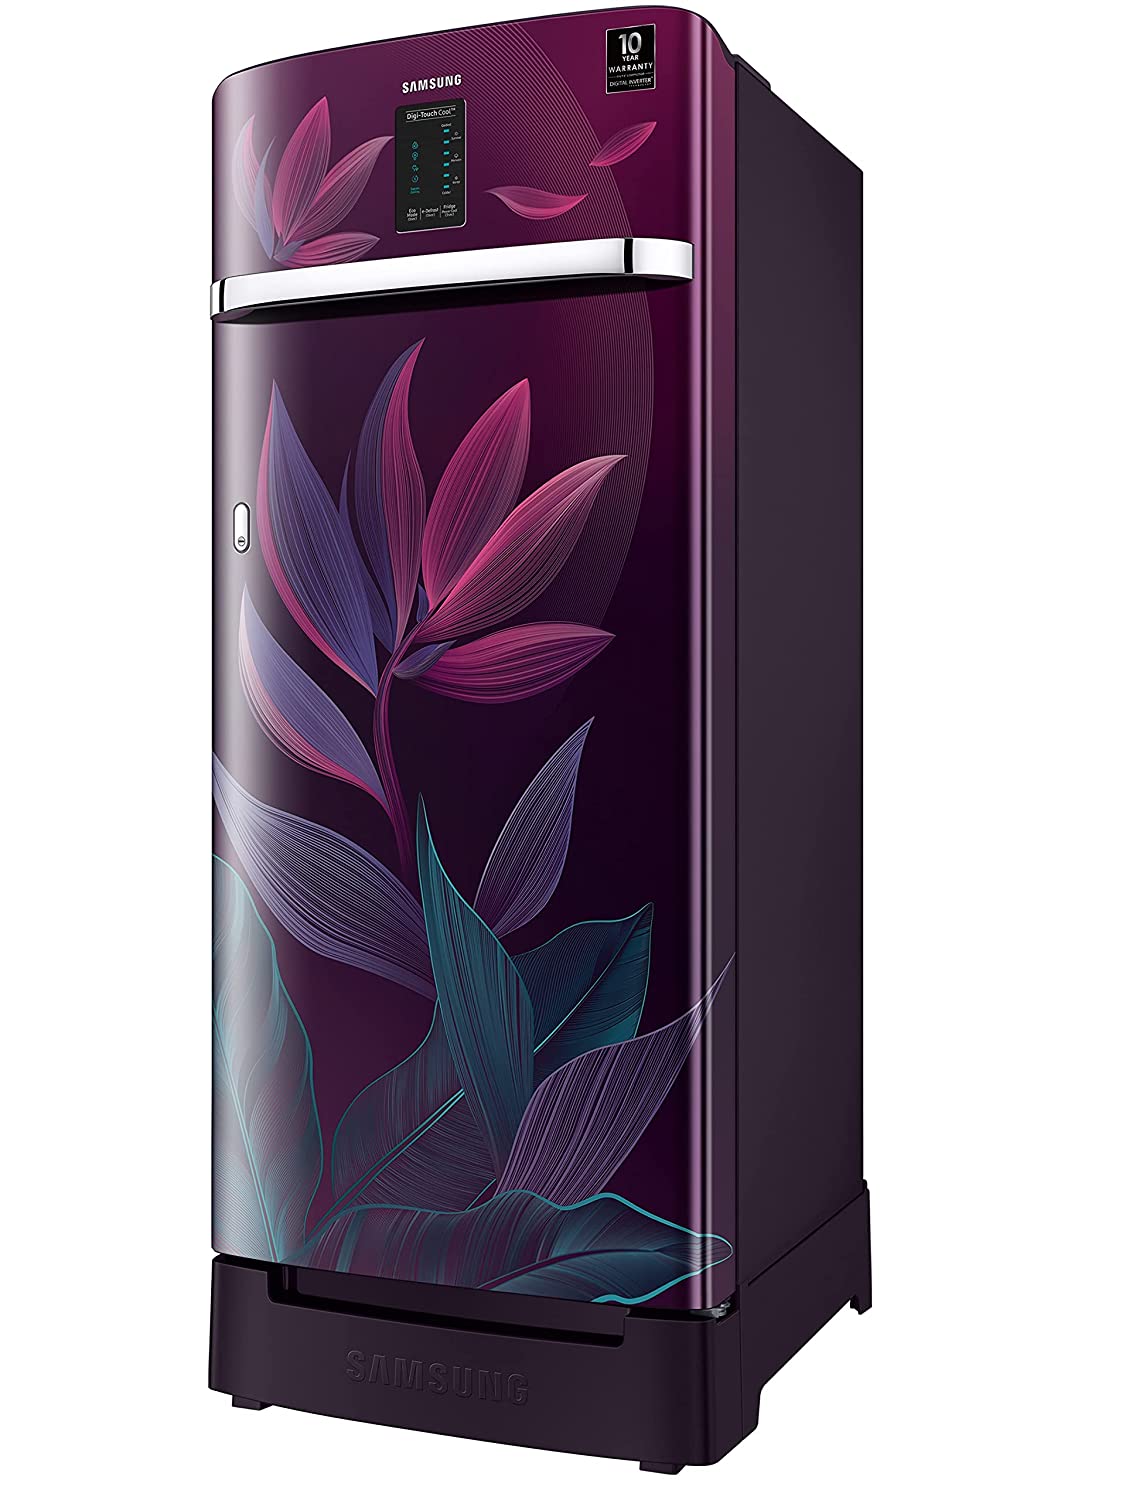 Samsung 225 L 3 Star Inverter Direct cool Single Door Refrigerator (RR23A2F2Y9R/HL, Digi-Touch Cool, Base Stand with Drawer, Paradise Bloom Purple)